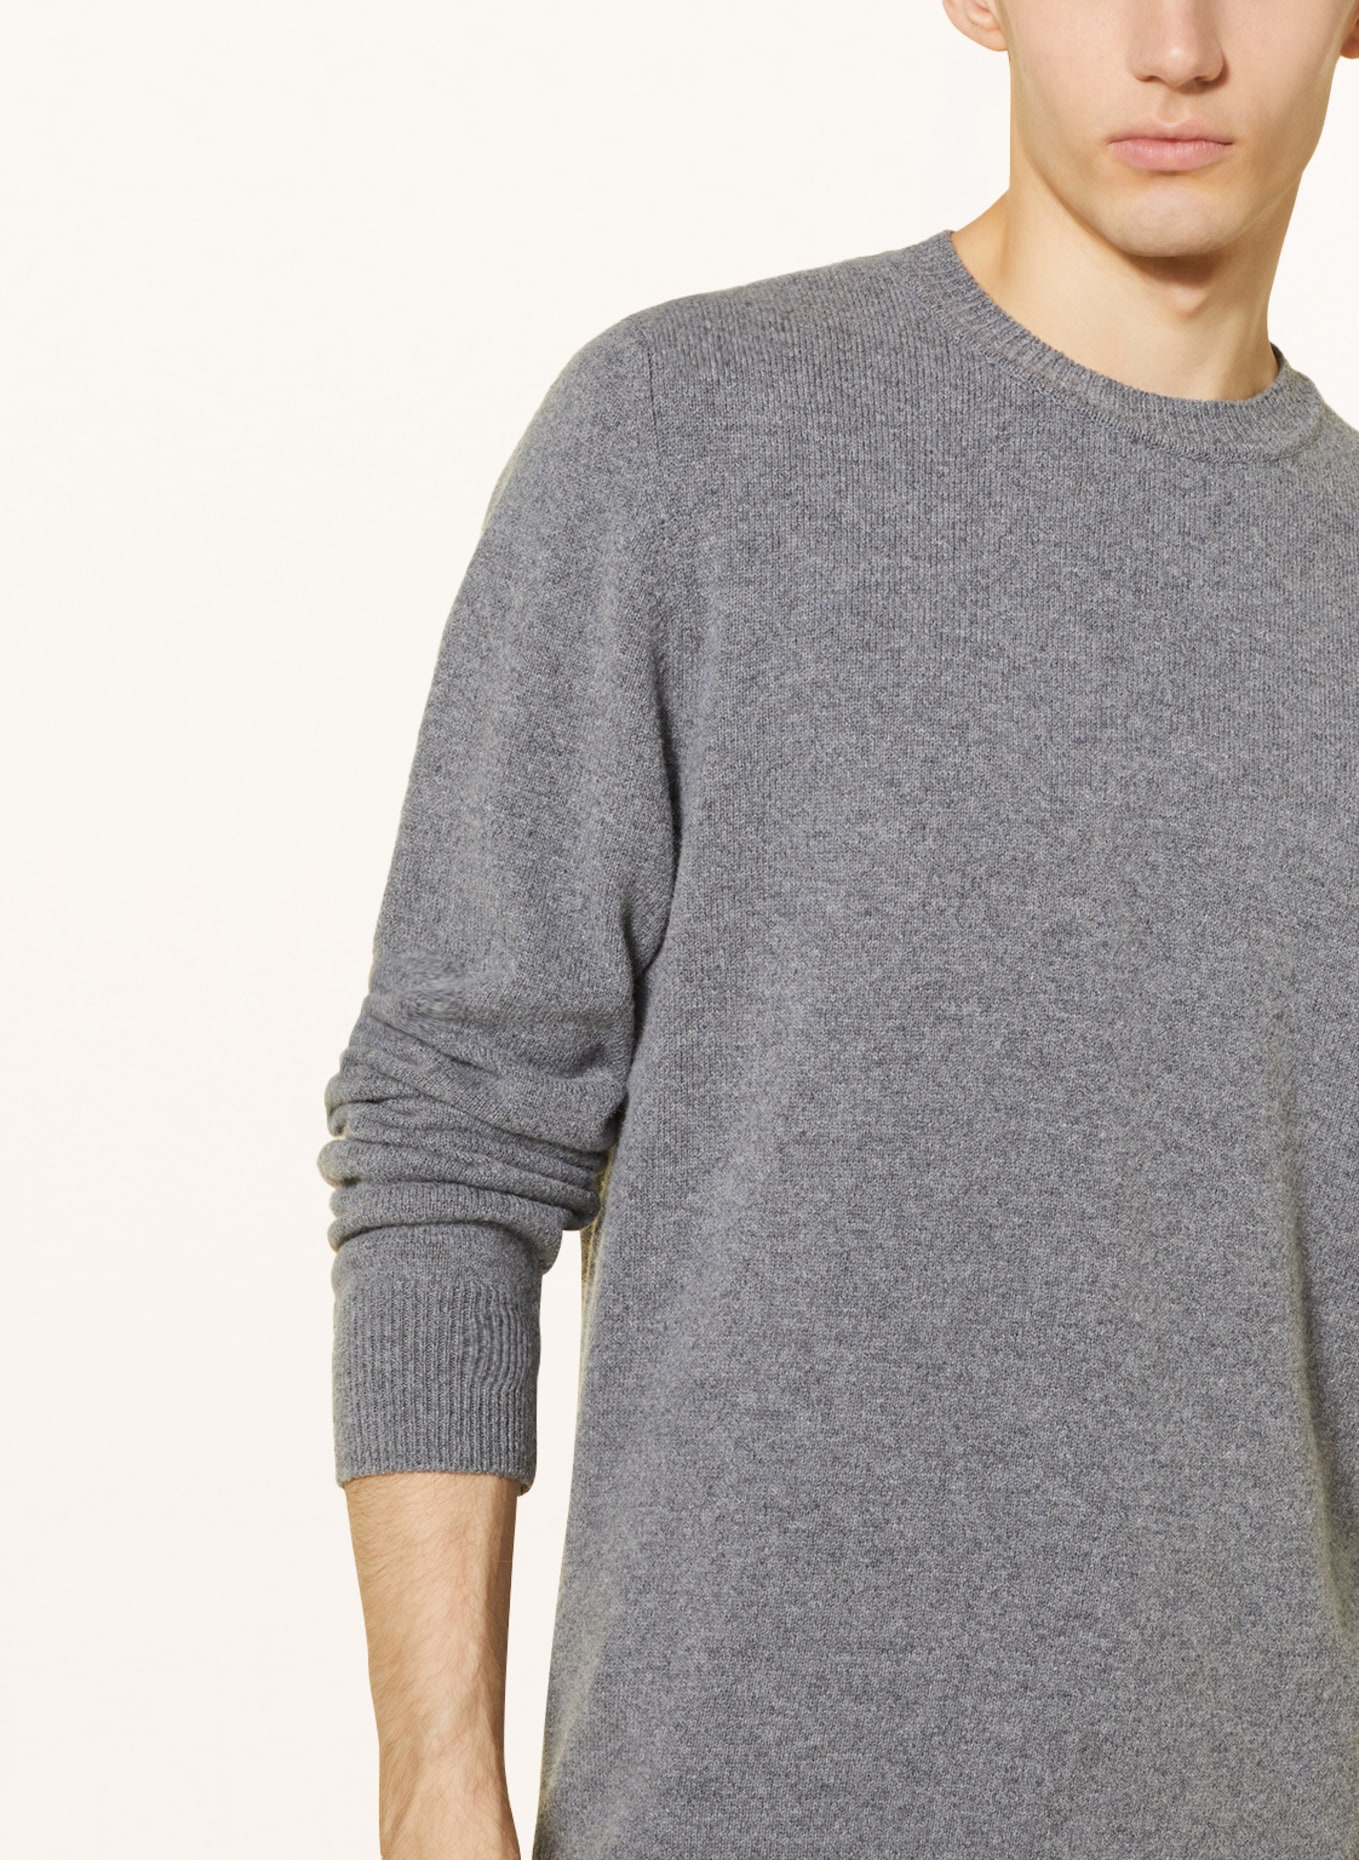 NORSE PROJECTS Pullover SIGFRIED aus Merinowolle, Farbe: GRAU (Bild 4)